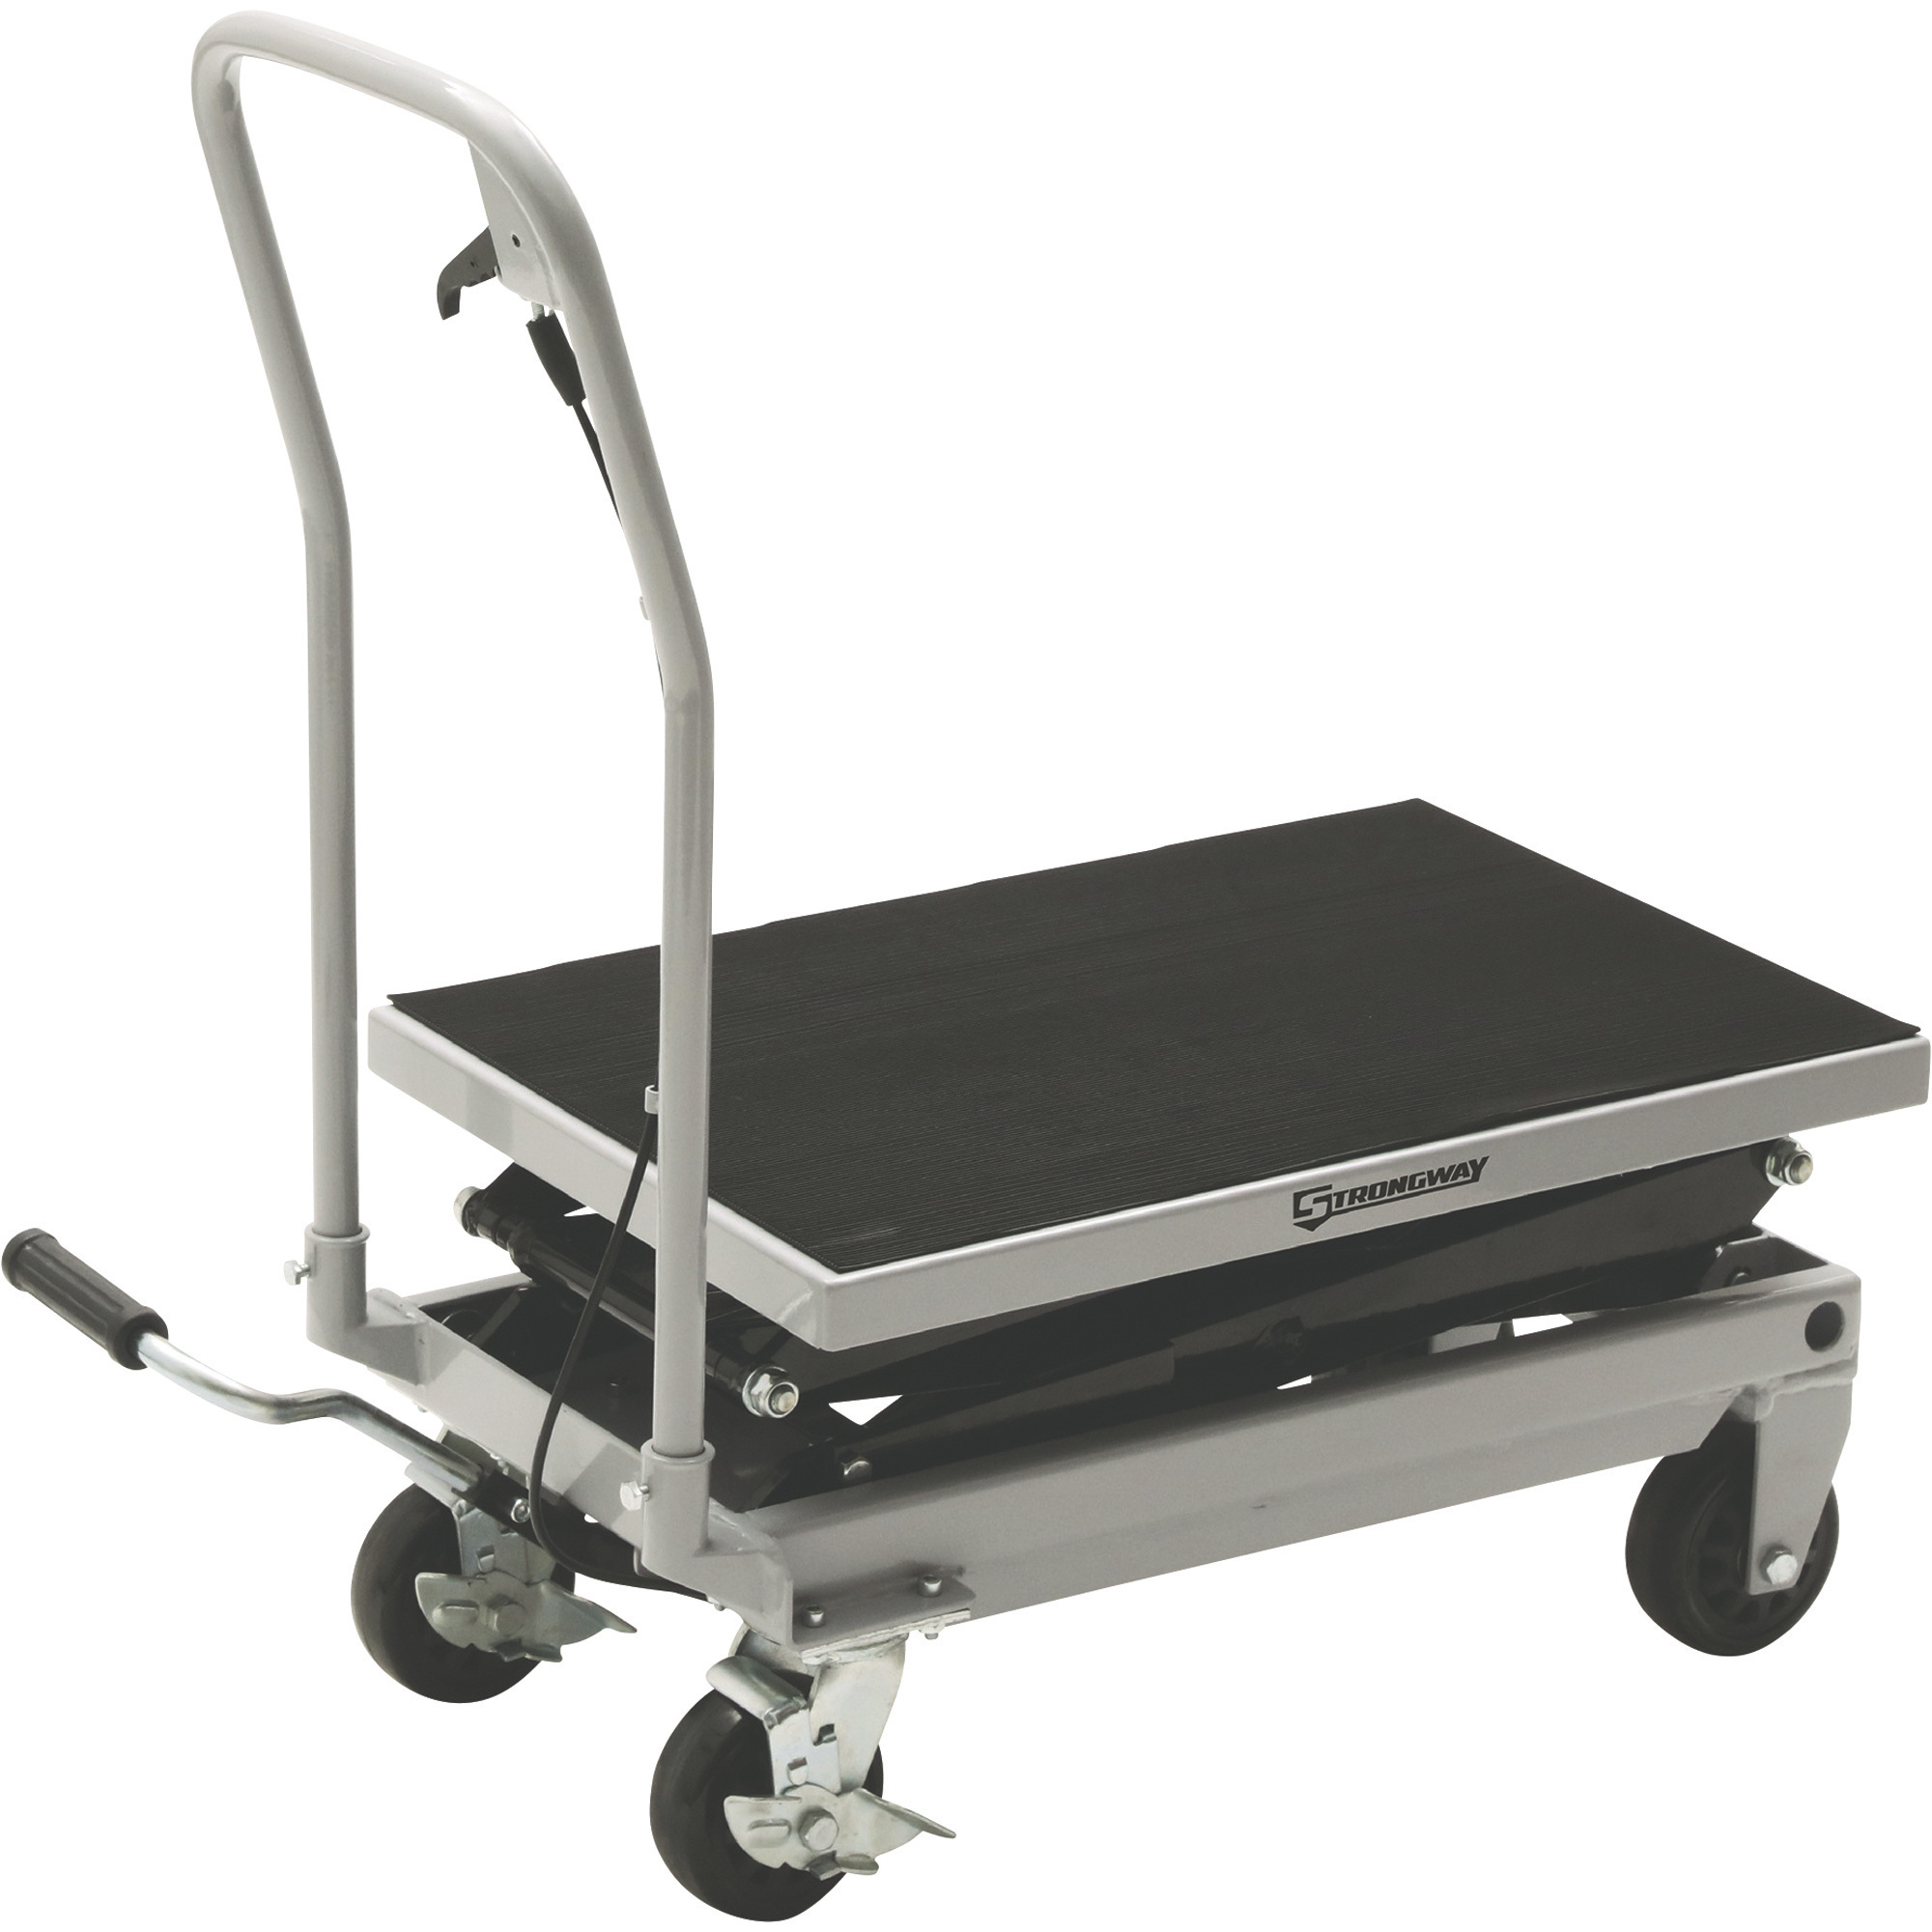 Strongway 2-Speed Hydraulic Rapid XT Lift Table Cart, 500-Lb. Capacity, 50 3/4Inch Lift Height